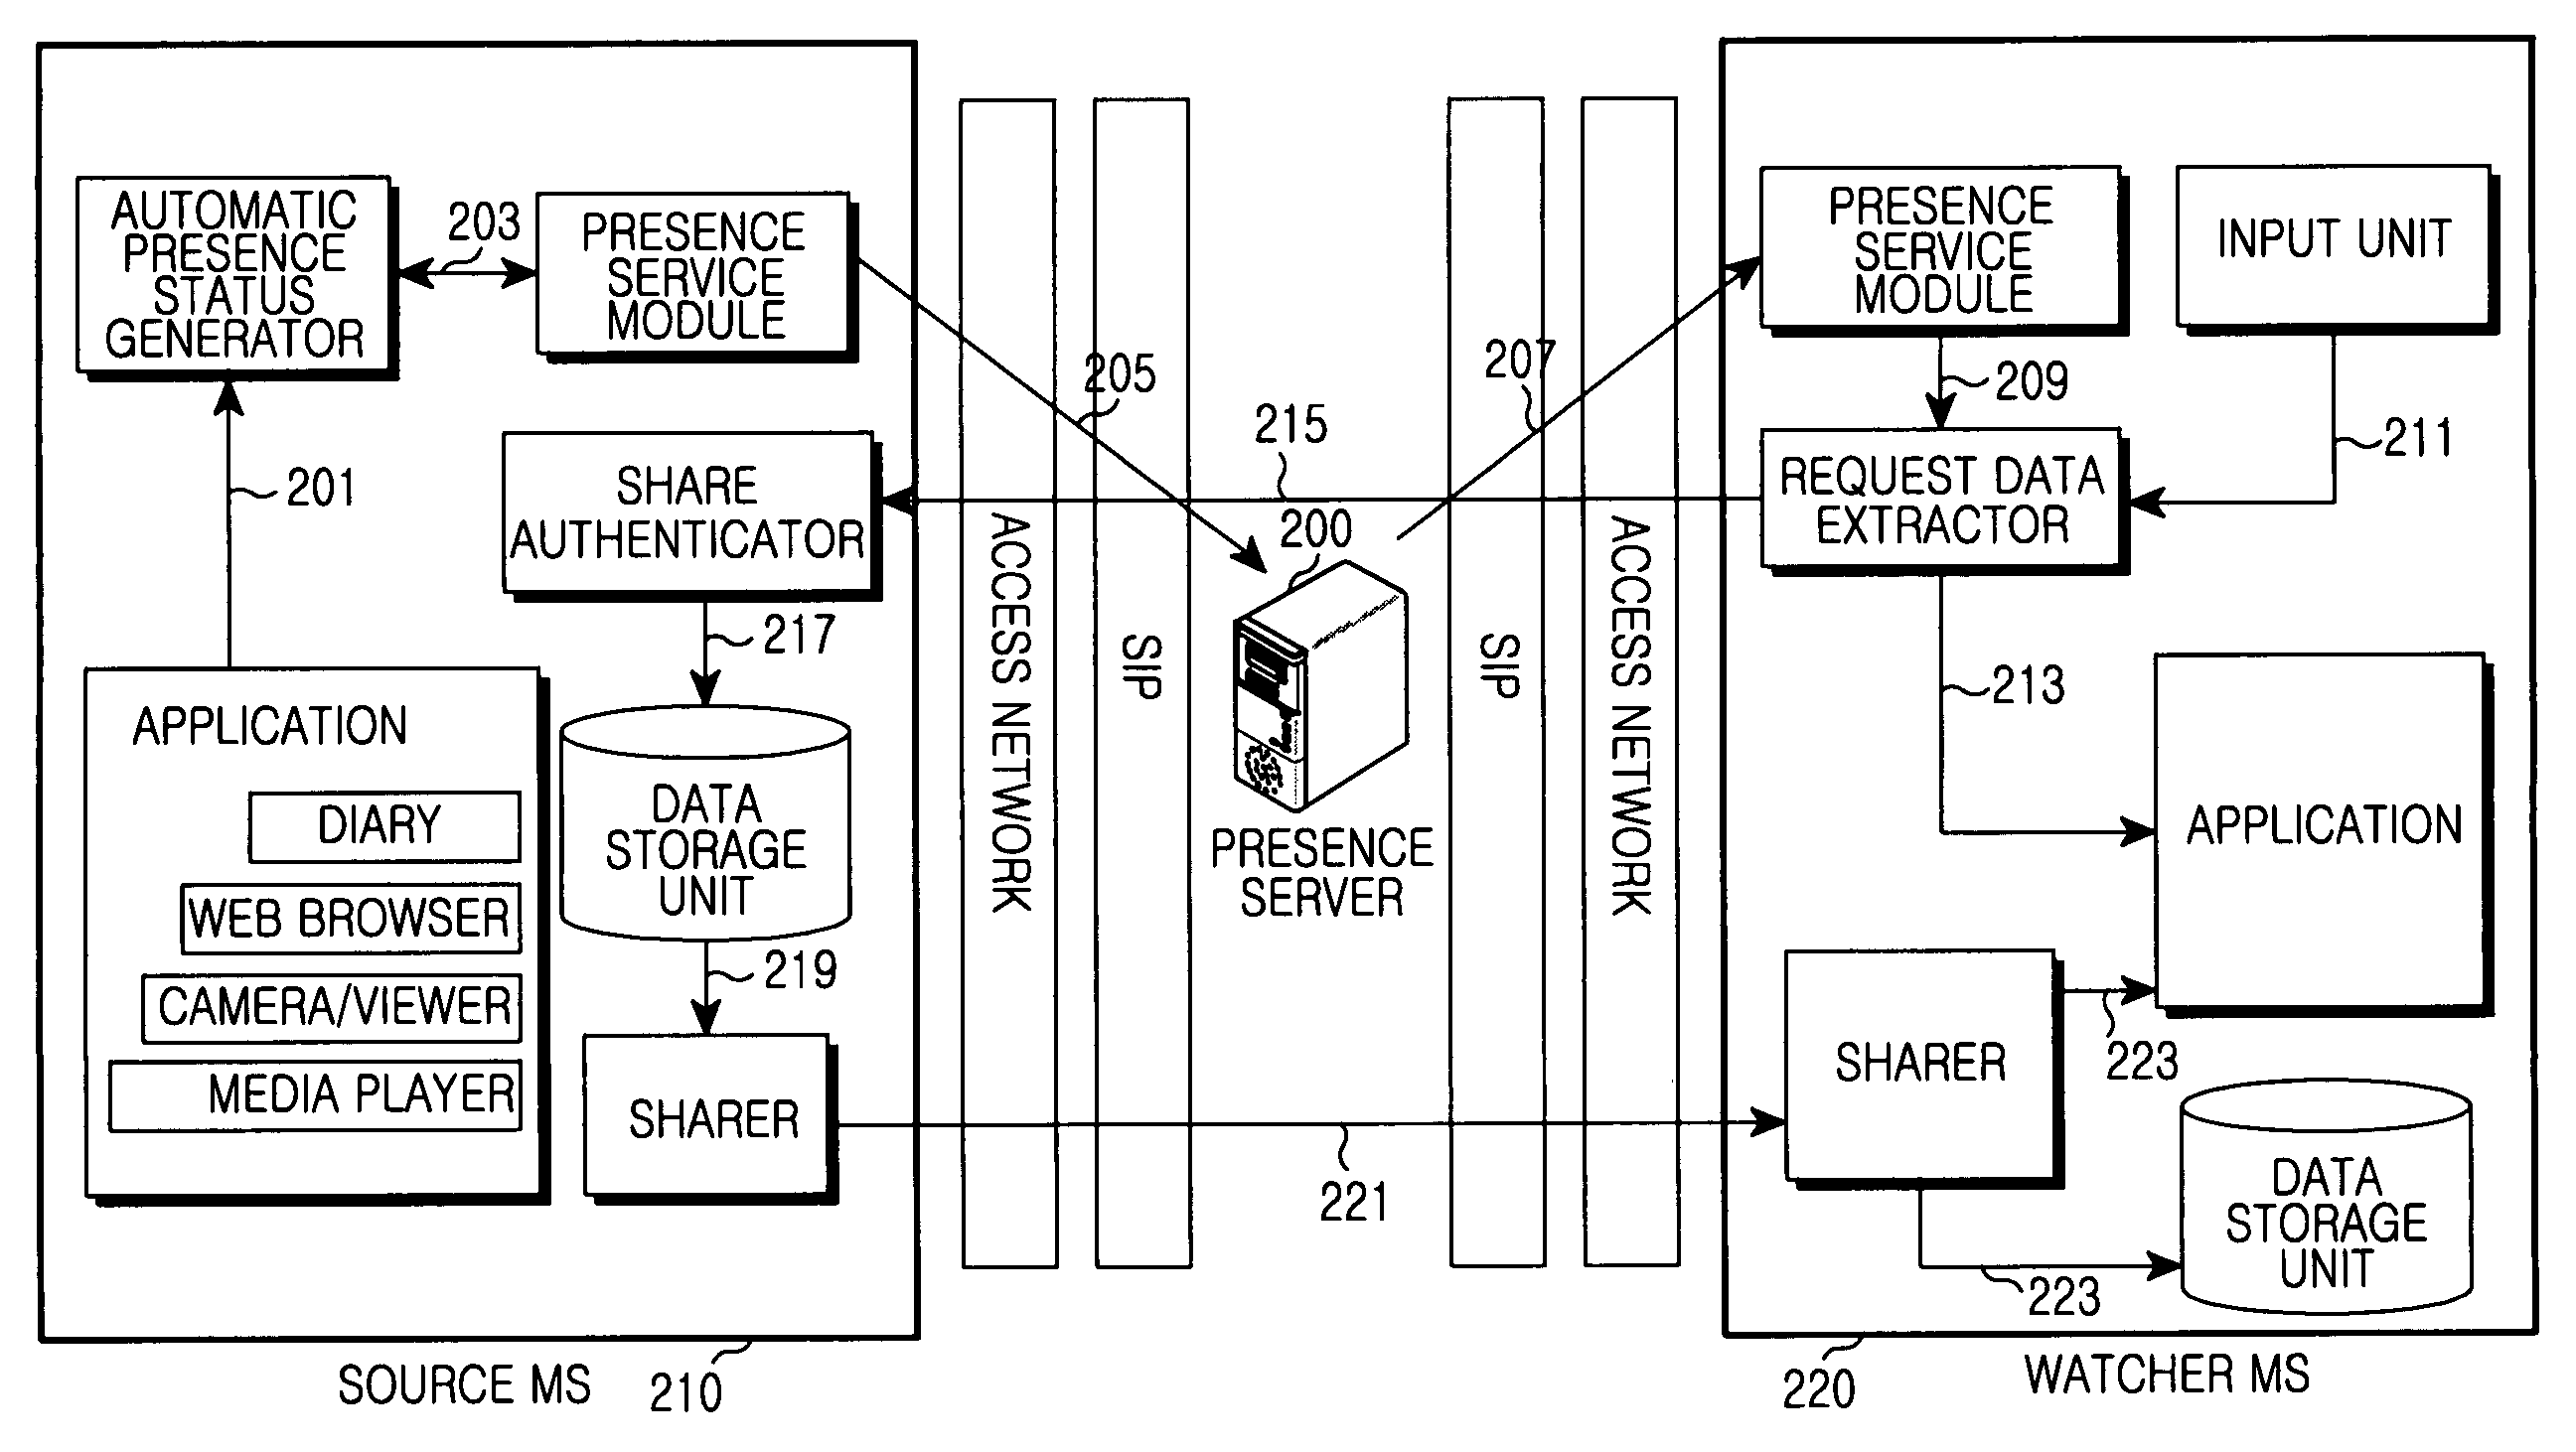 Apparatus and method for sharing information through presence service in a communication network